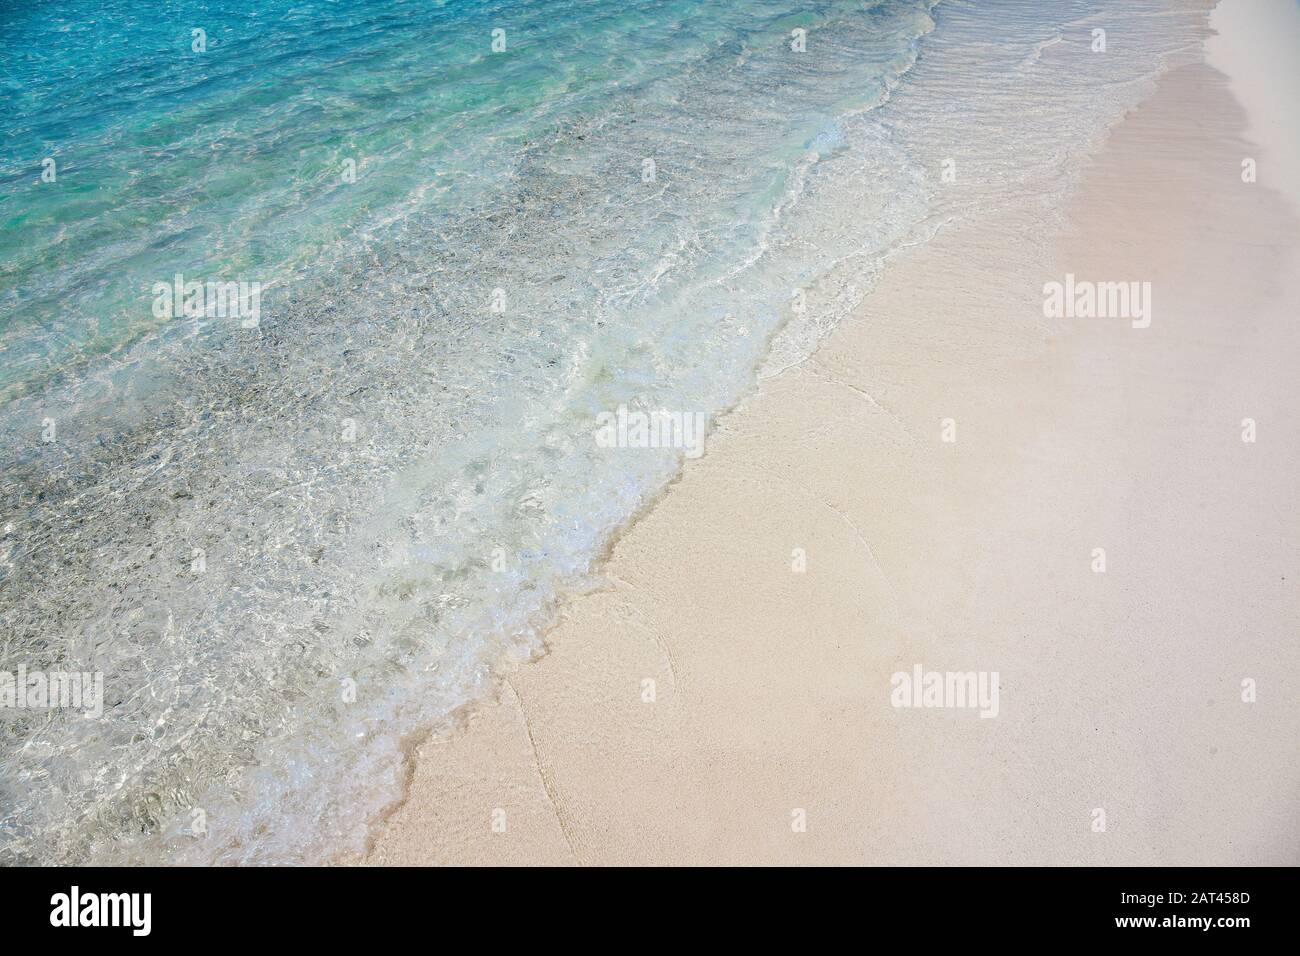 Sea shore sand and turquoise blue water wave Stock Photo